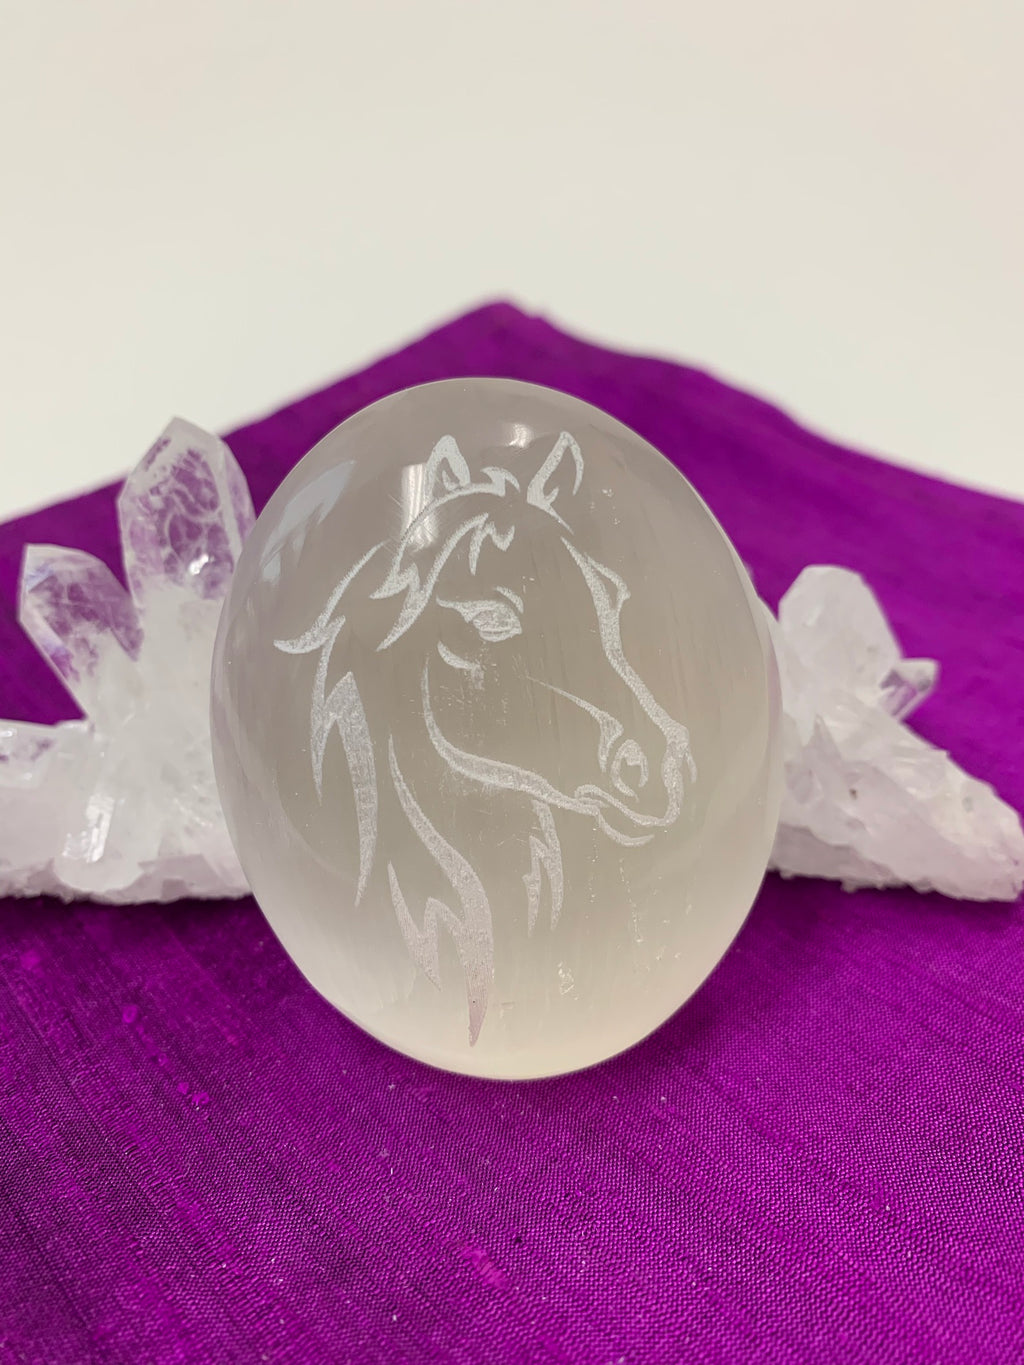 Horse (head and mane) etched on smooth, polished white selenite. Selenite ranges from translucent to milky white in color. Horse represents power and the use of wisdom with power. These selenite stones vary in weight, but the average is 4.2 oz. and size is approximately 3"X2.5". These selenite stones are ethically sourced and workers earn living wages.  